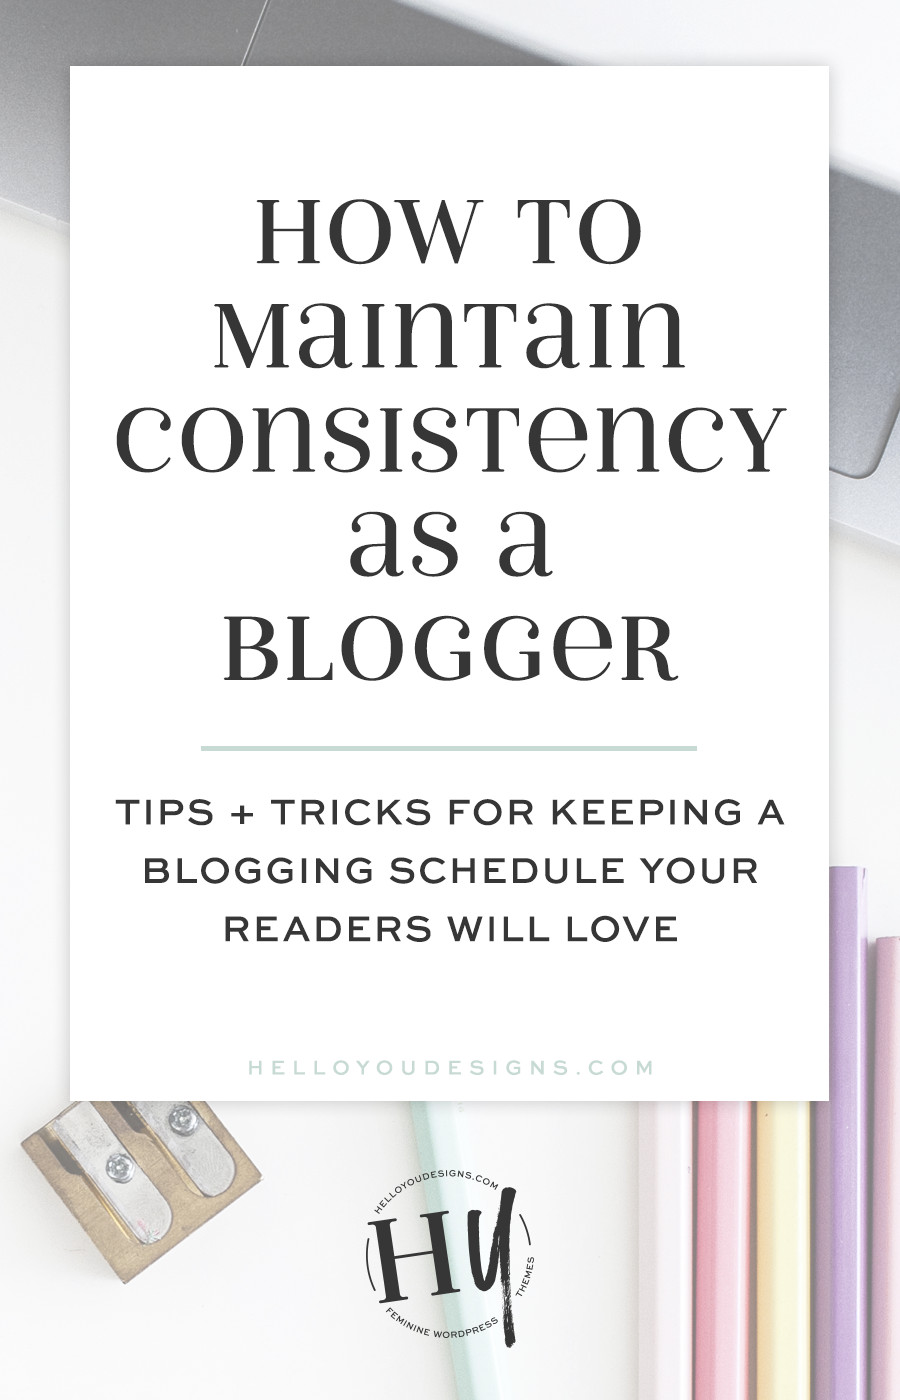 How to Maintain Consistency as a blogger